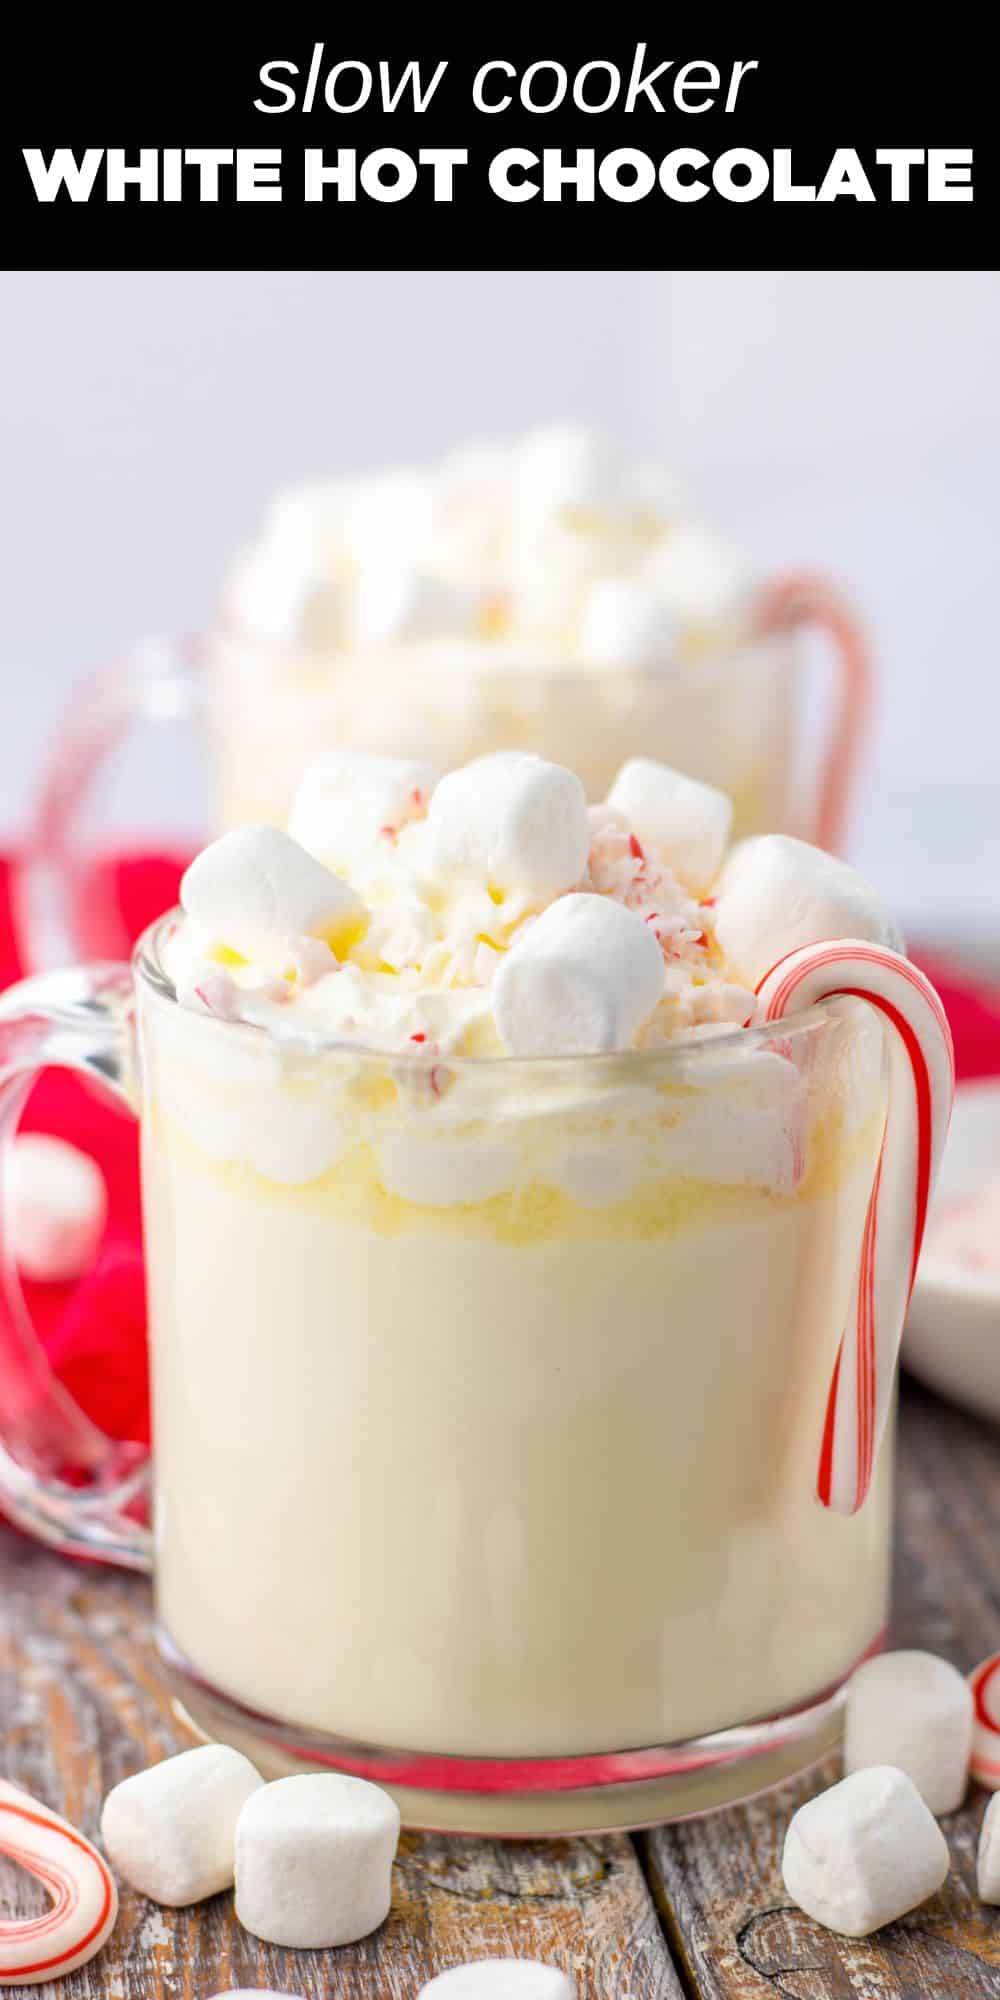 This Slow Cooker White Hot Chocolate is the perfect drink all season long. Rich white hot chocolate is flavored perfectly with peppermint and garnished with whipped cream, marshmallows and crushed peppermint. It is so festive and will warm you right up.